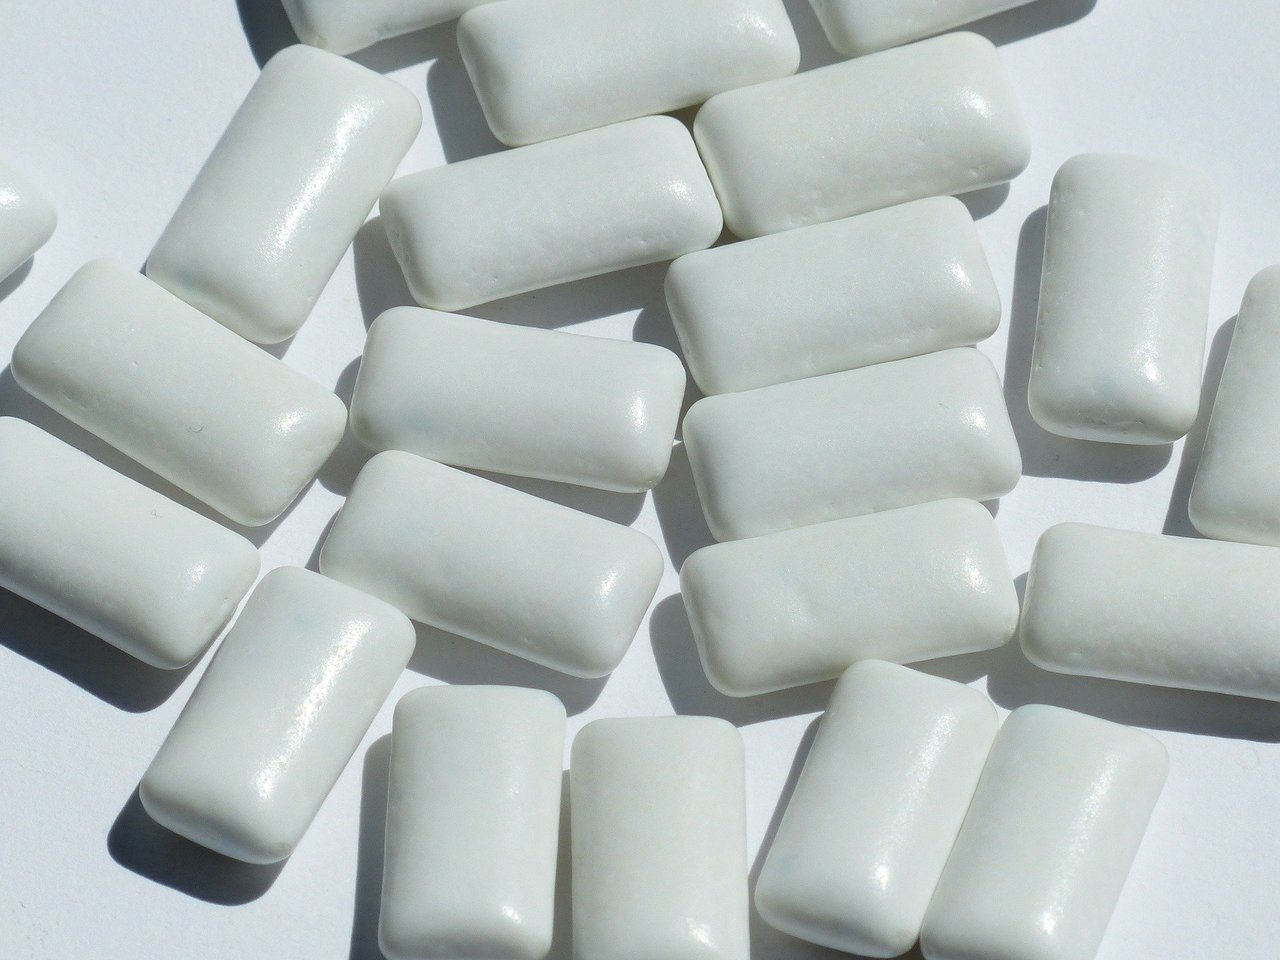 Study finds that chewing gum while walking affects both physical and  physiological functions